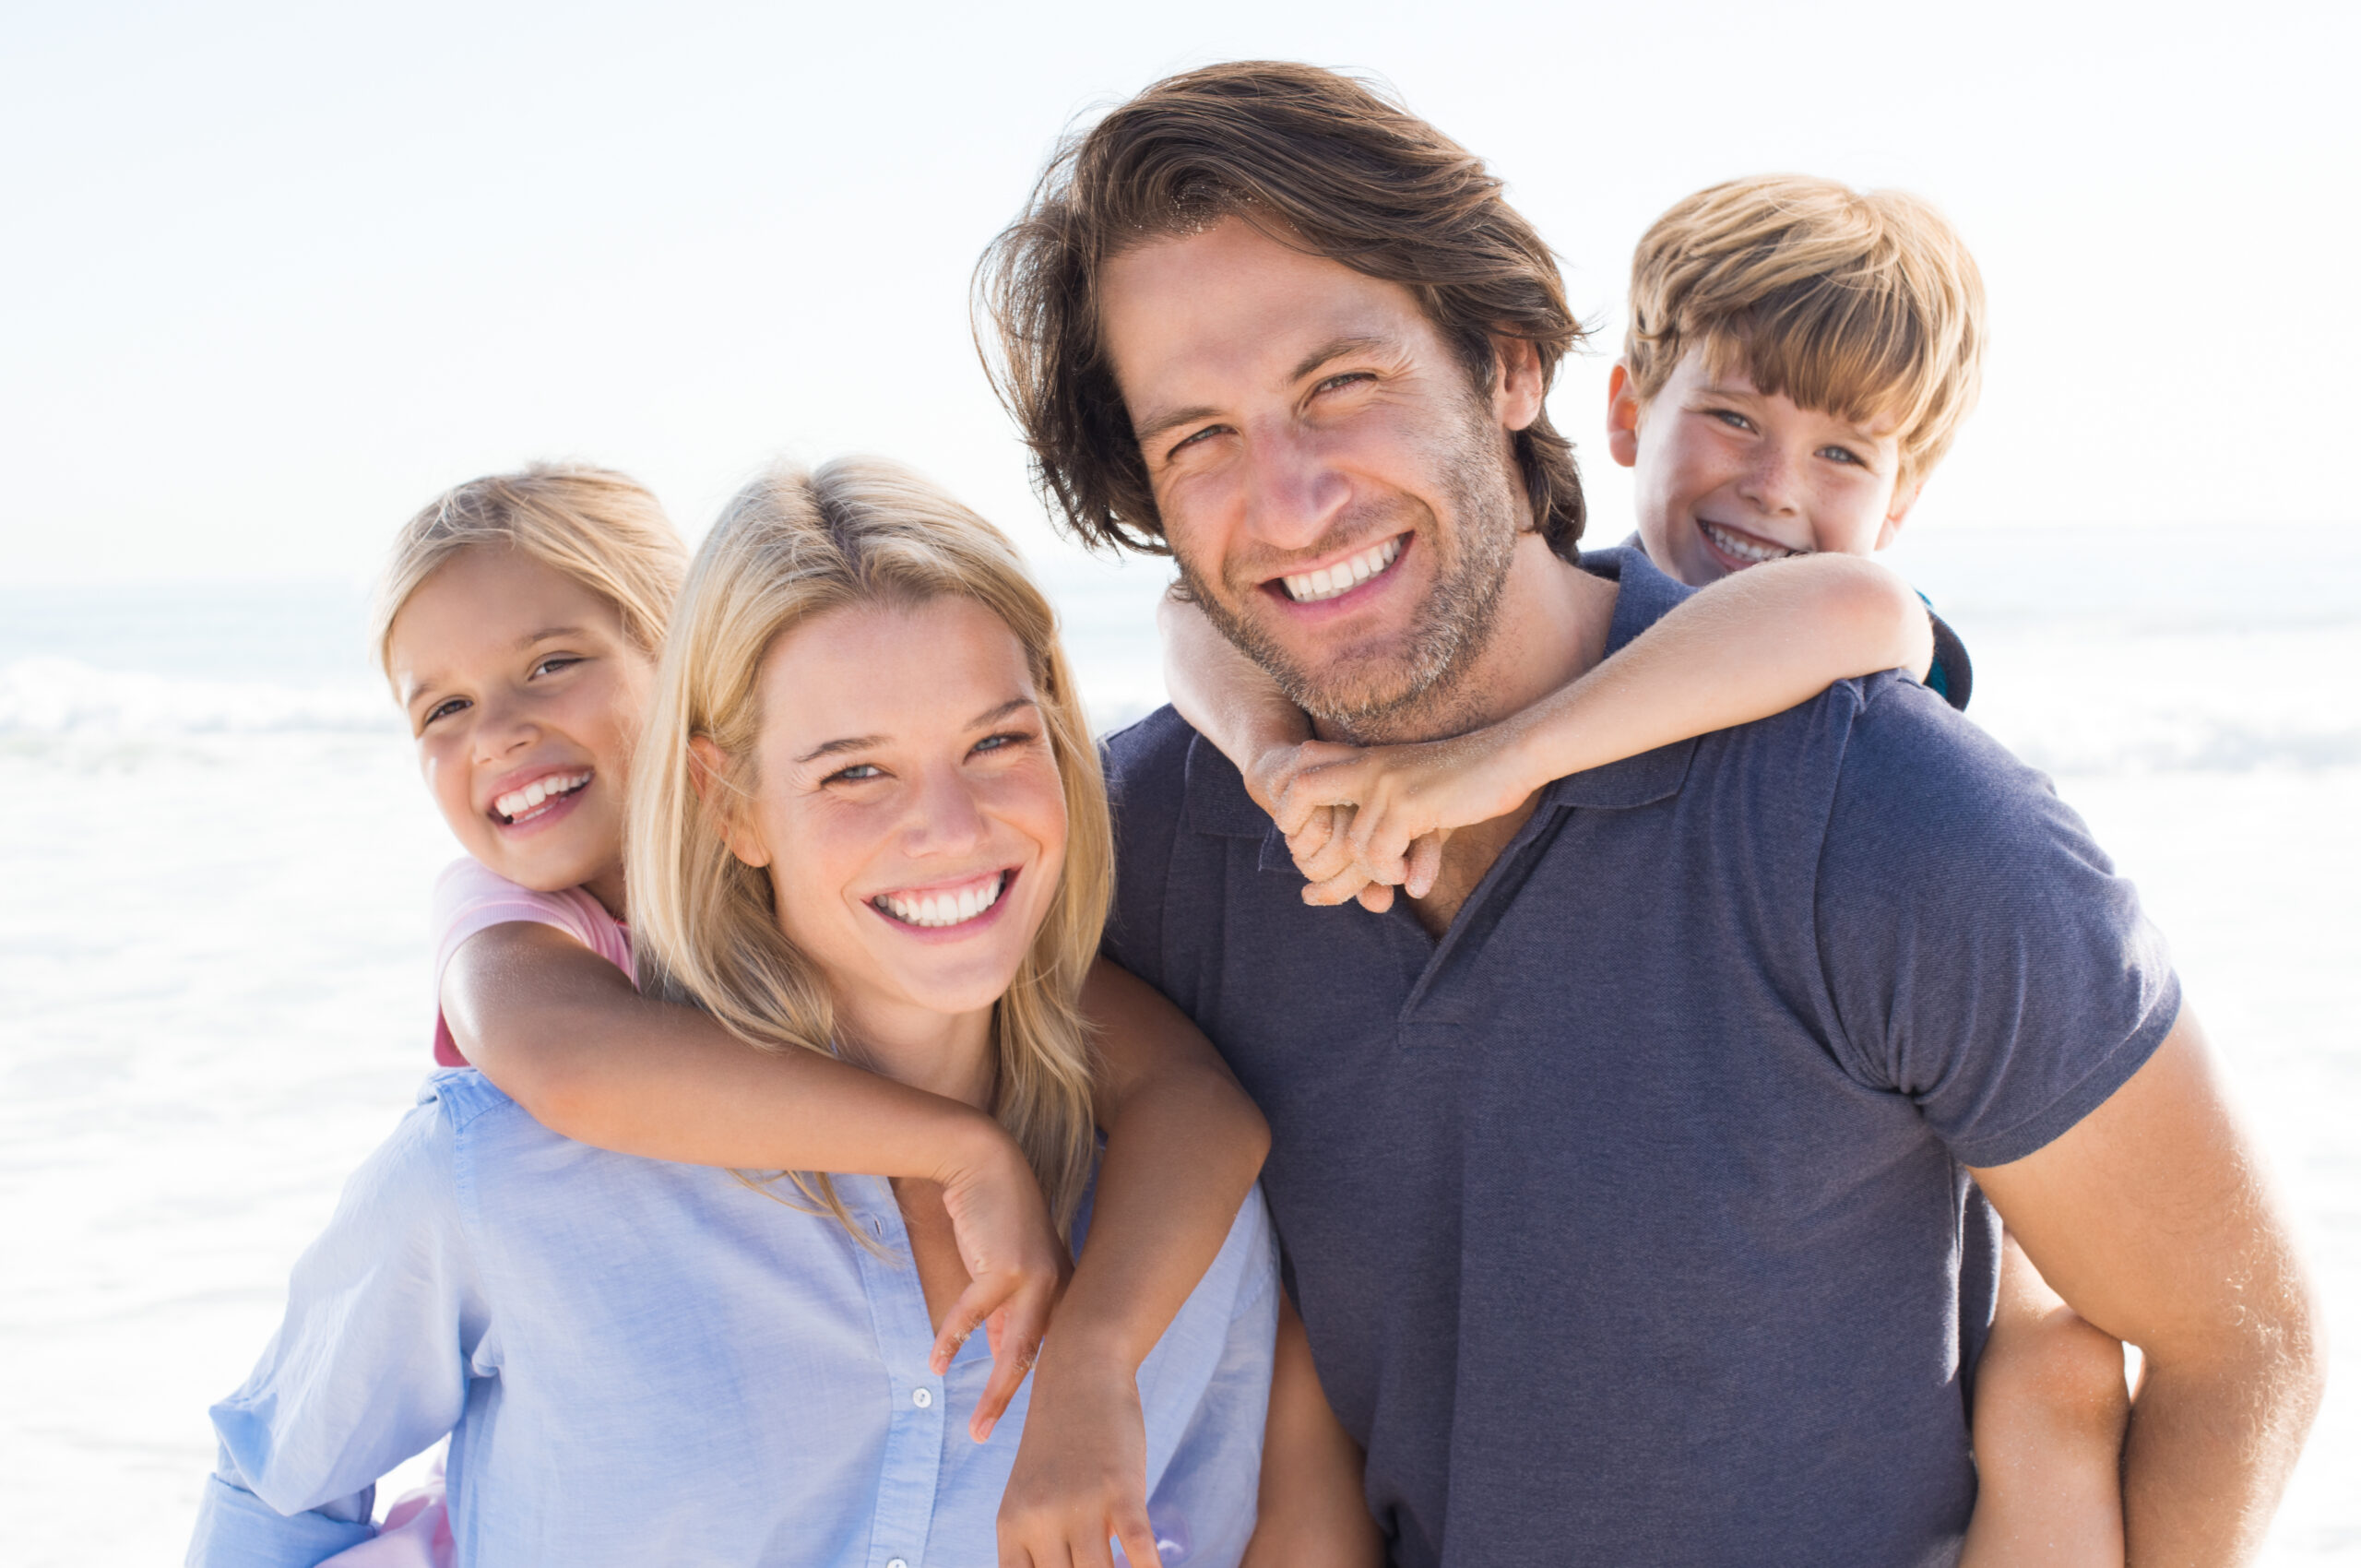 Young happy couple with two kids happy they qualify for $5M life insurance without exam or labs